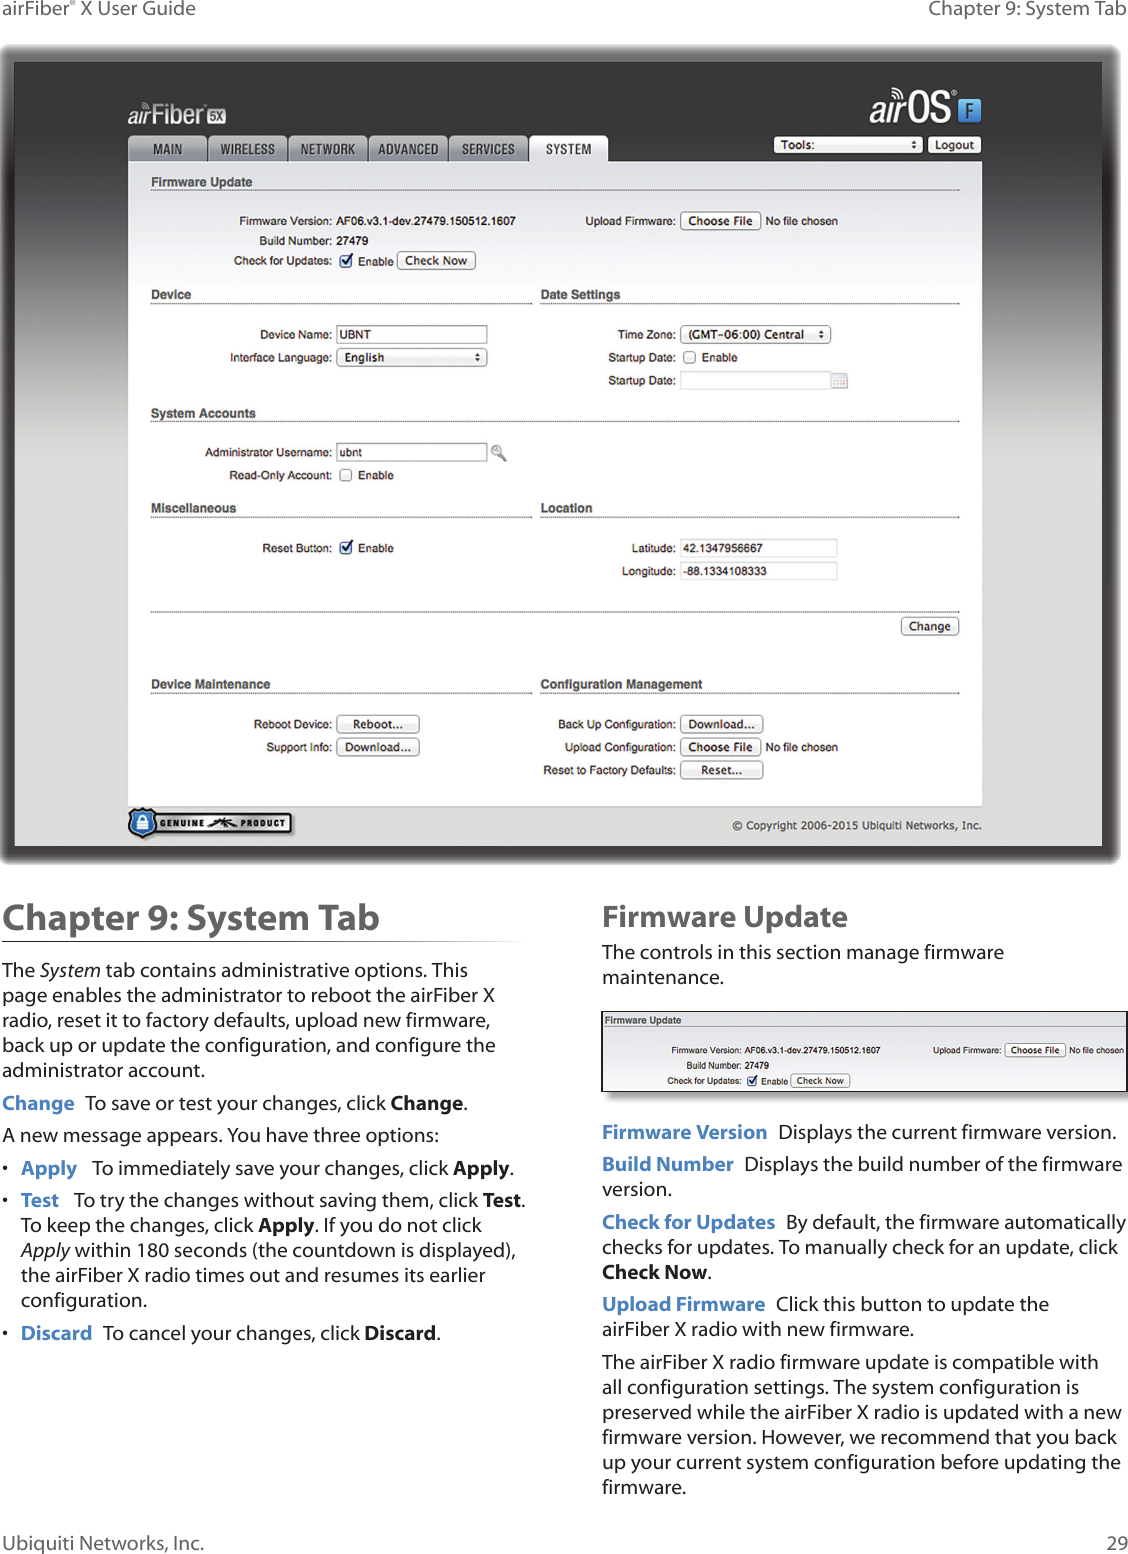 29Chapter 9: System TabairFiber® X User GuideUbiquiti Networks, Inc.Chapter 9: System TabThe System tab contains administrative options. This page enables the administrator to reboot the airFiberX radio, reset it to factory defaults, upload new firmware, back up or update the configuration, and configure the administrator account.Change  To save or test your changes, click Change.A new message appears. You have three options:•  Apply   To immediately save your changes, click Apply.•  Test   To try the changes without saving them, click Test. To keep the changes, click Apply. If you do not click Apply within 180 seconds (the countdown is displayed), the airFiberX radio times out and resumes its earlier configuration.•  Discard  To cancel your changes, click Discard.Firmware UpdateThe controls in this section manage firmware maintenance.Firmware Version  Displays the current firmware version.Build Number  Displays the build number of the firmware version.Check for Updates  By default, the firmware automatically checks for updates. To manually check for an update, click Check Now.Upload Firmware  Click this button to update the airFiberX radio with new firmware.The airFiberX radio firmware update is compatible with all configuration settings. The system configuration is preserved while the airFiberX radio is updated with a new firmware version. However, we recommend that you back up your current system configuration before updating the firmware. 